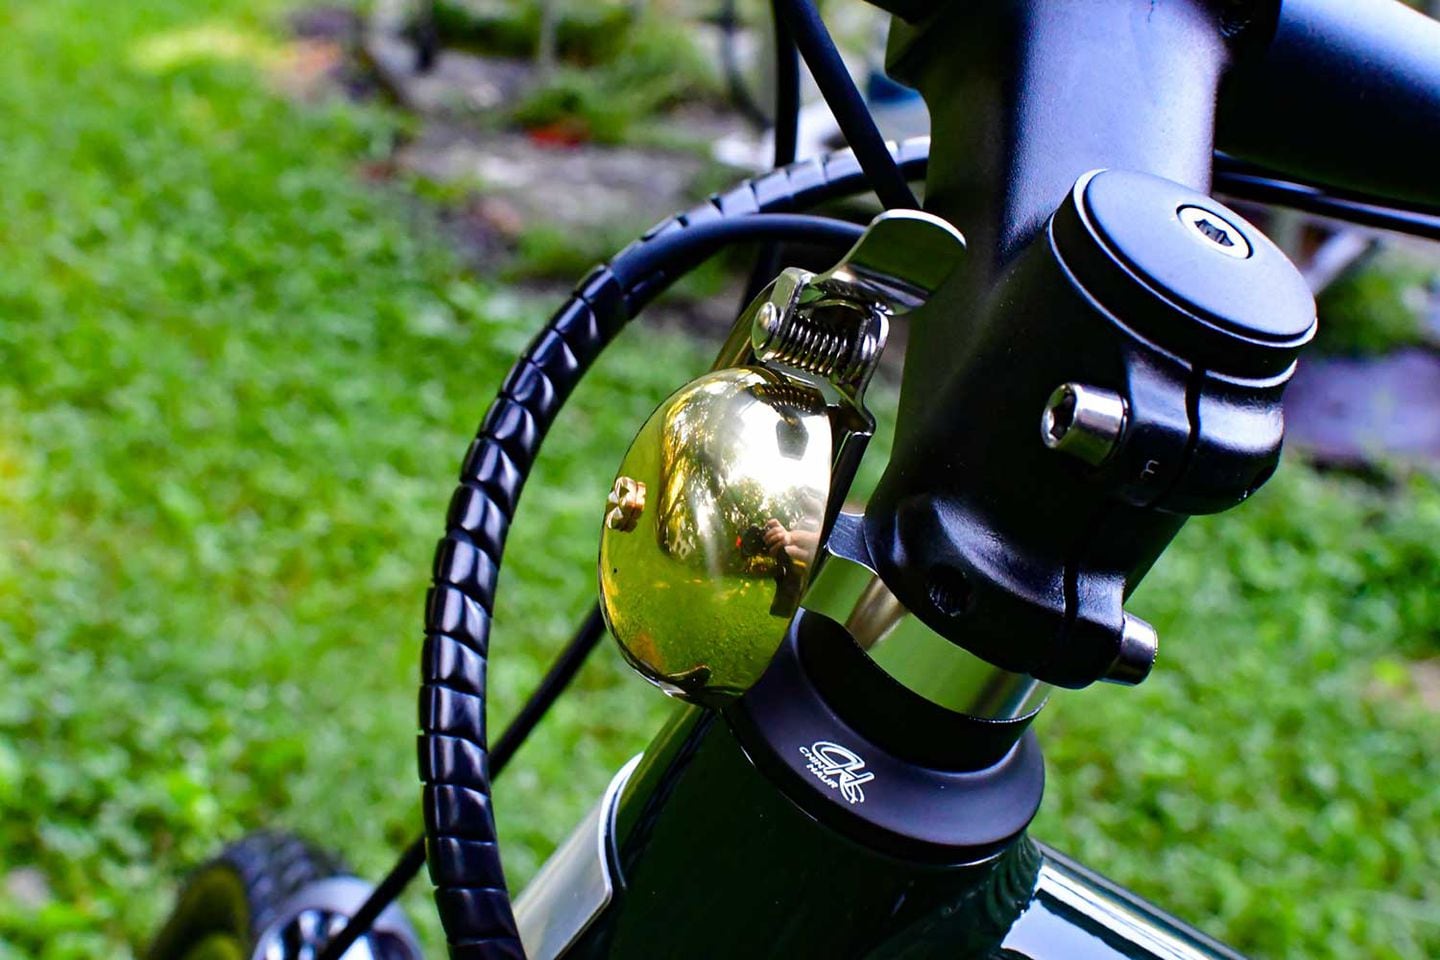 MINIMALX BELL Bicycle Mountain Bike Copper Bell High Quality Loudly Speaker Z5 